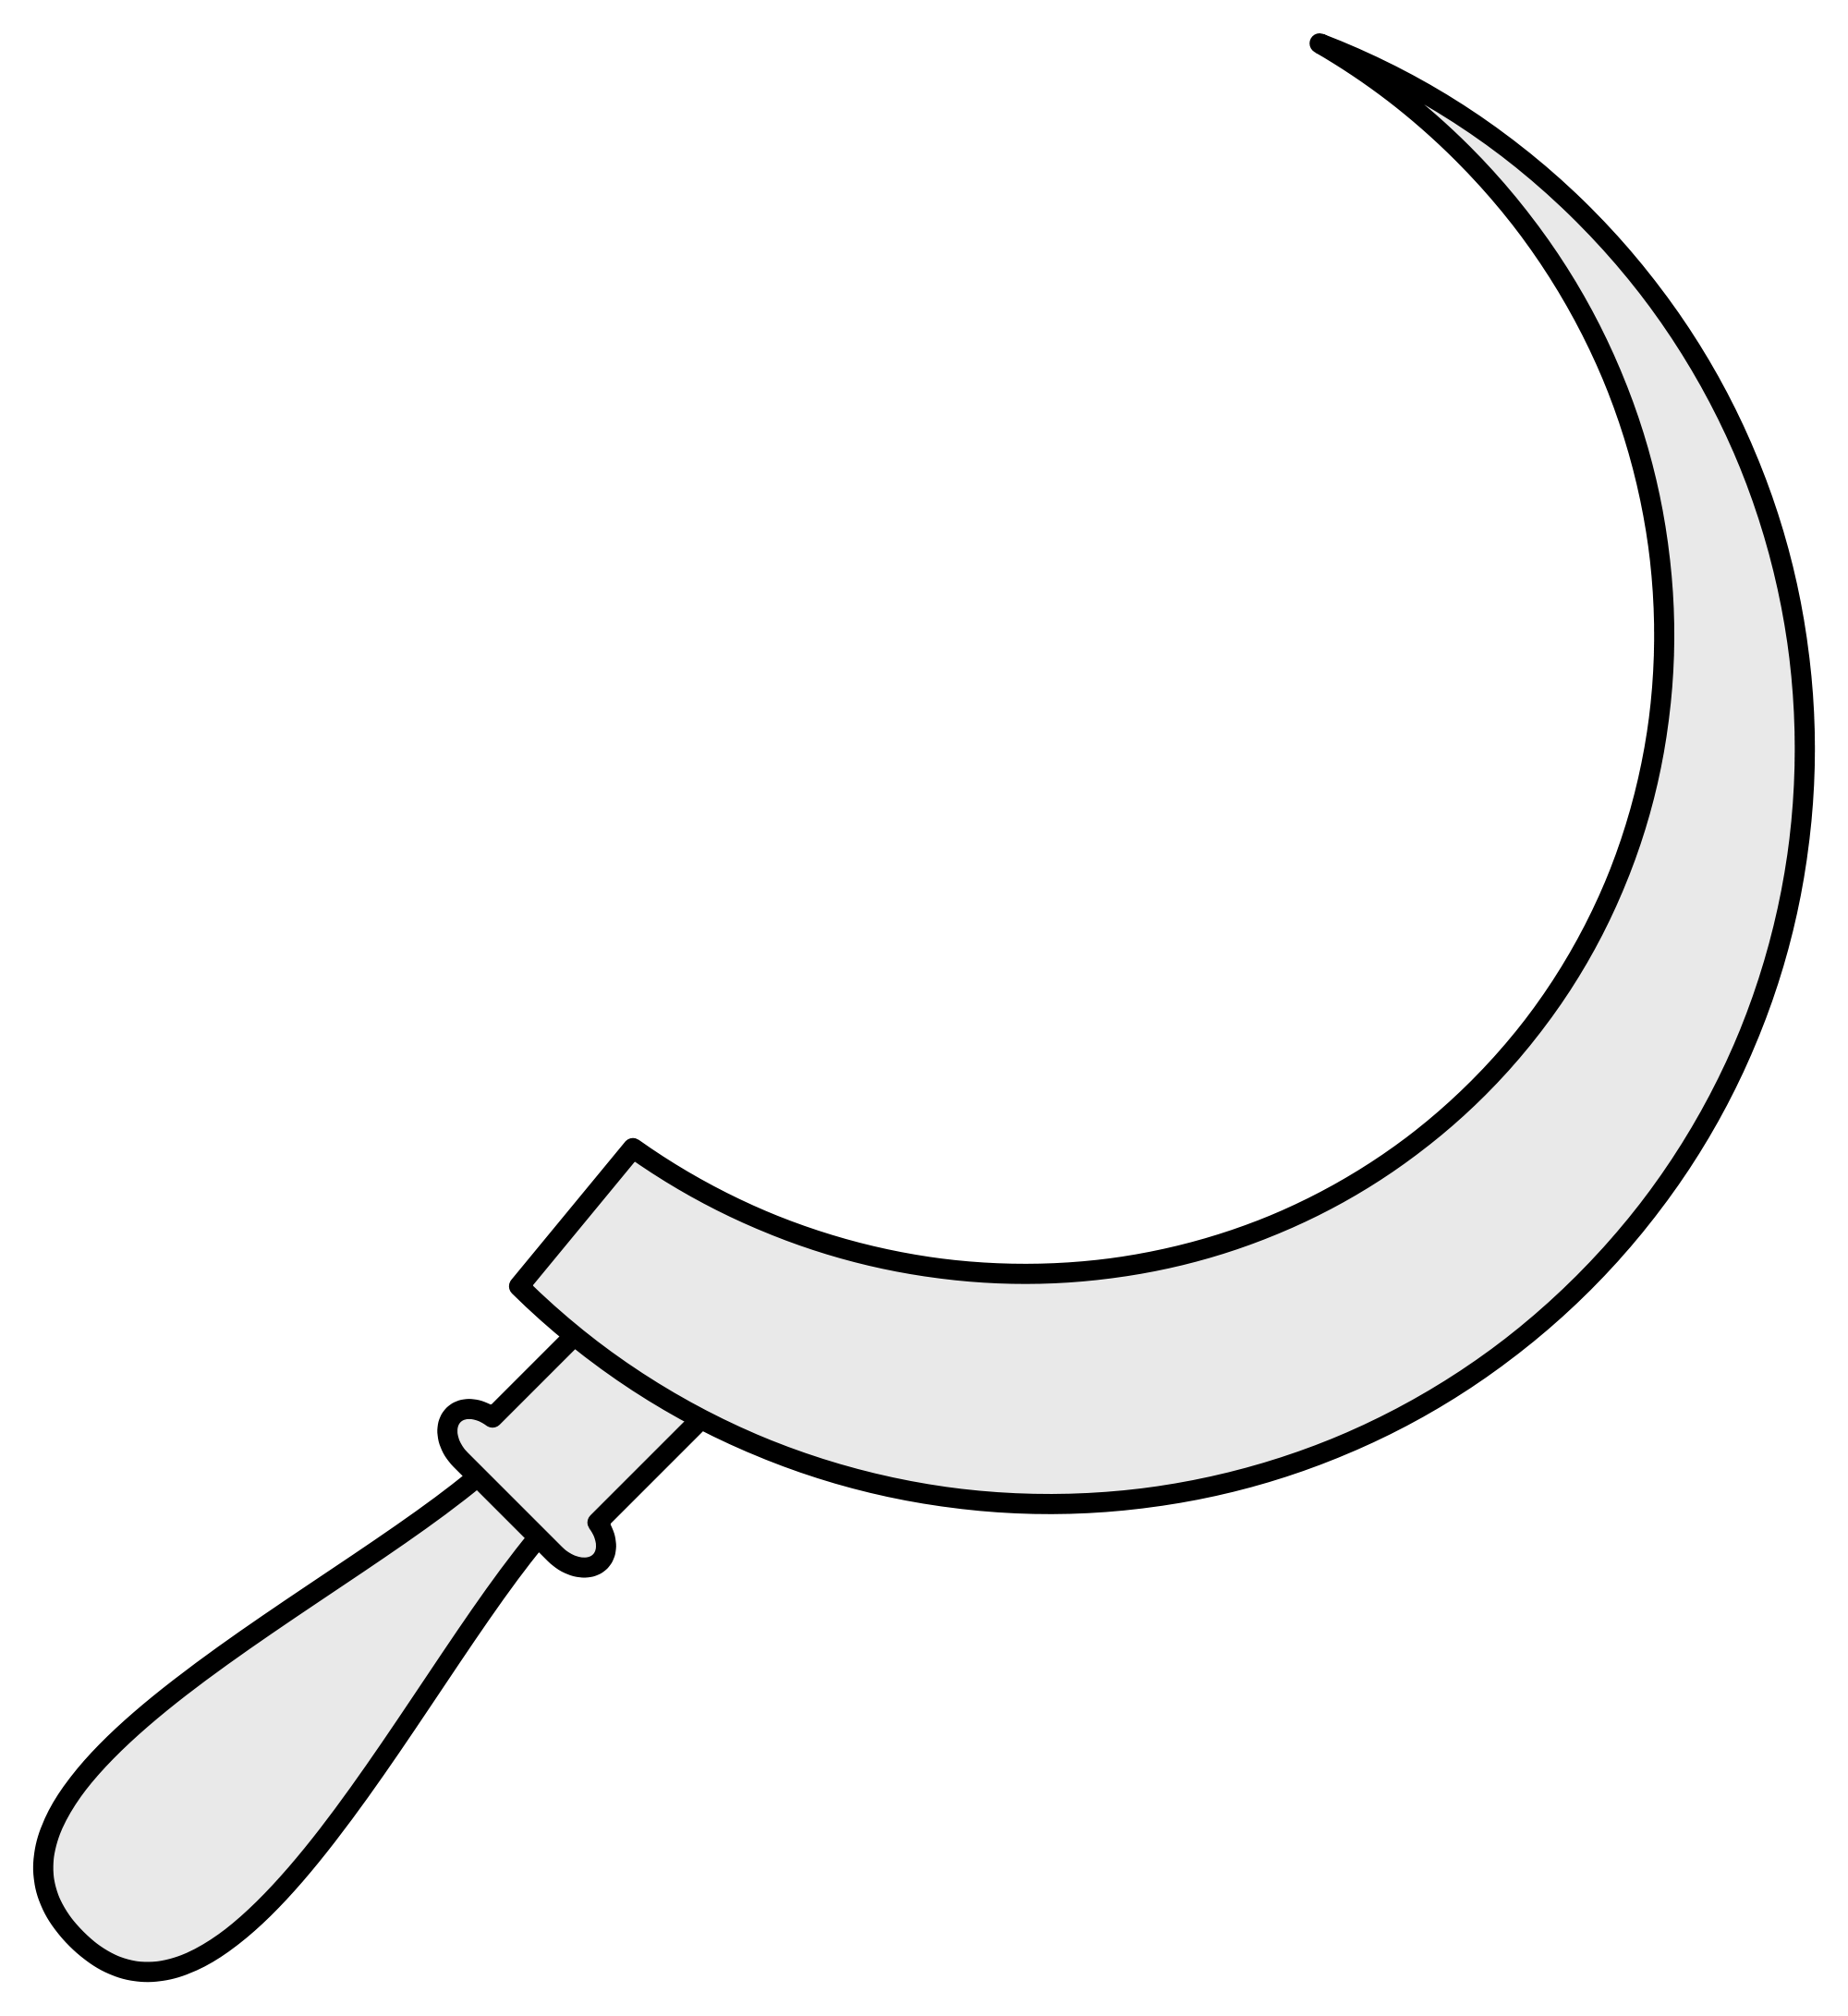 tool clipart sickle